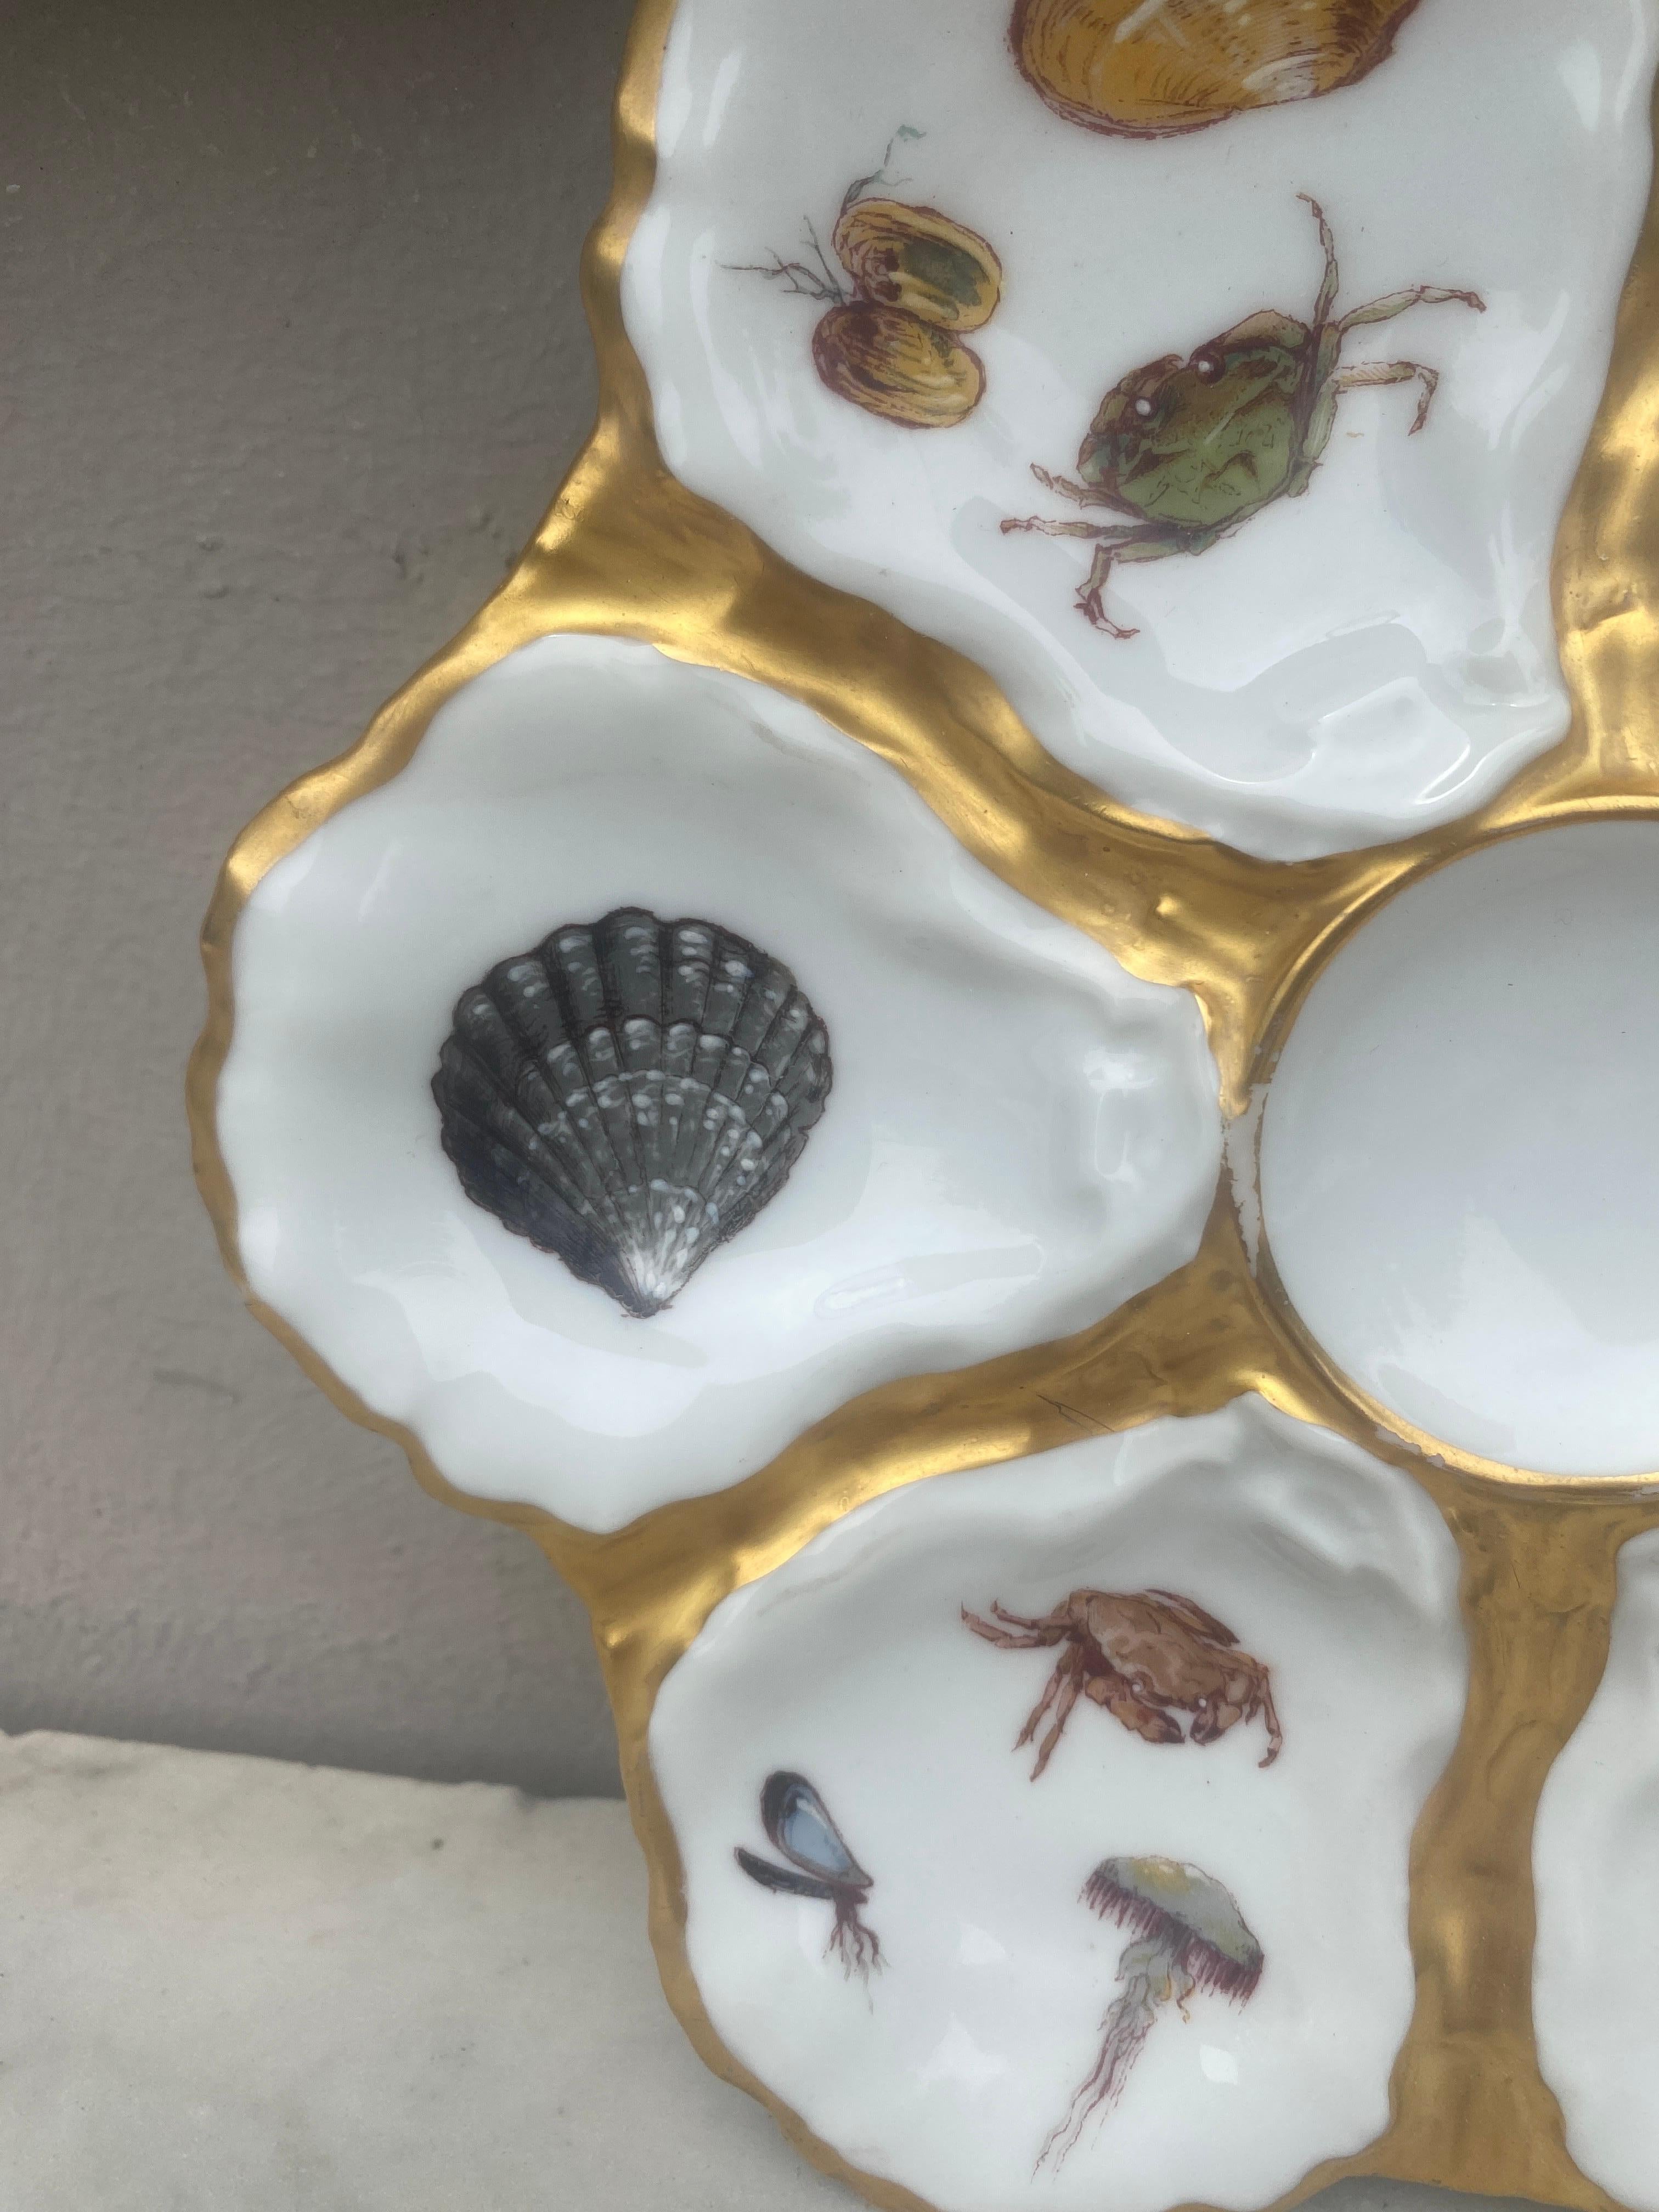 Antique 19th-century French porcelain oyster plate with sealife pattern (shells, seaweeds, crabs,turtle) signed Limoges Haviland & C.